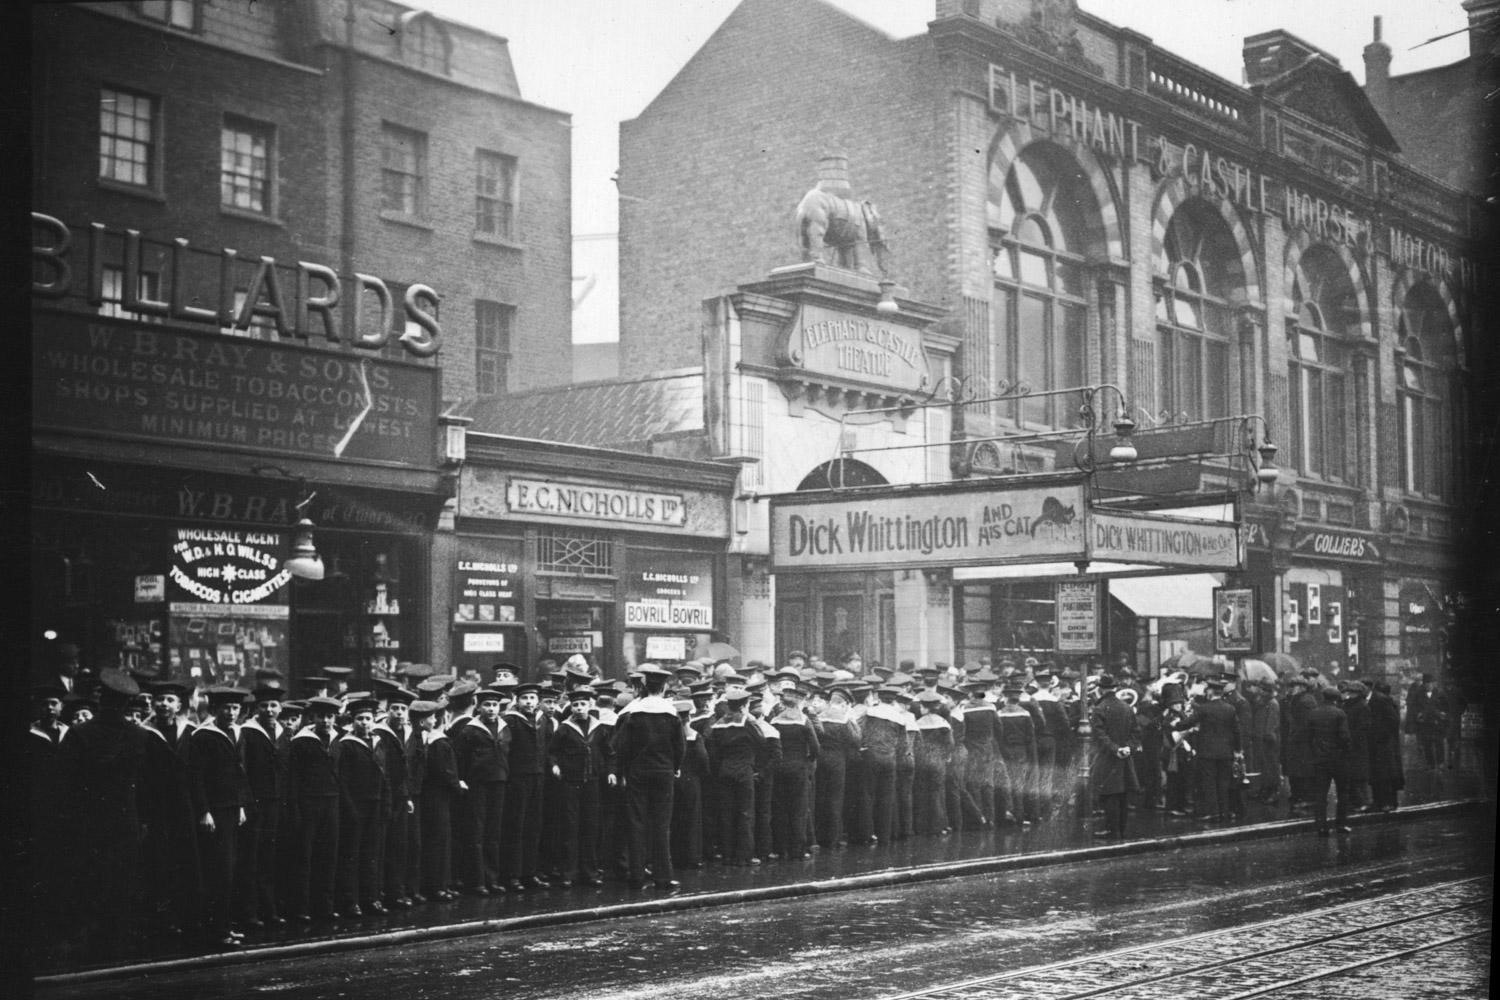 New Kent Road. 950 sailor boys arriving at the Elephant and Castle Theatre, to see Dick Whittington.1928.jpg